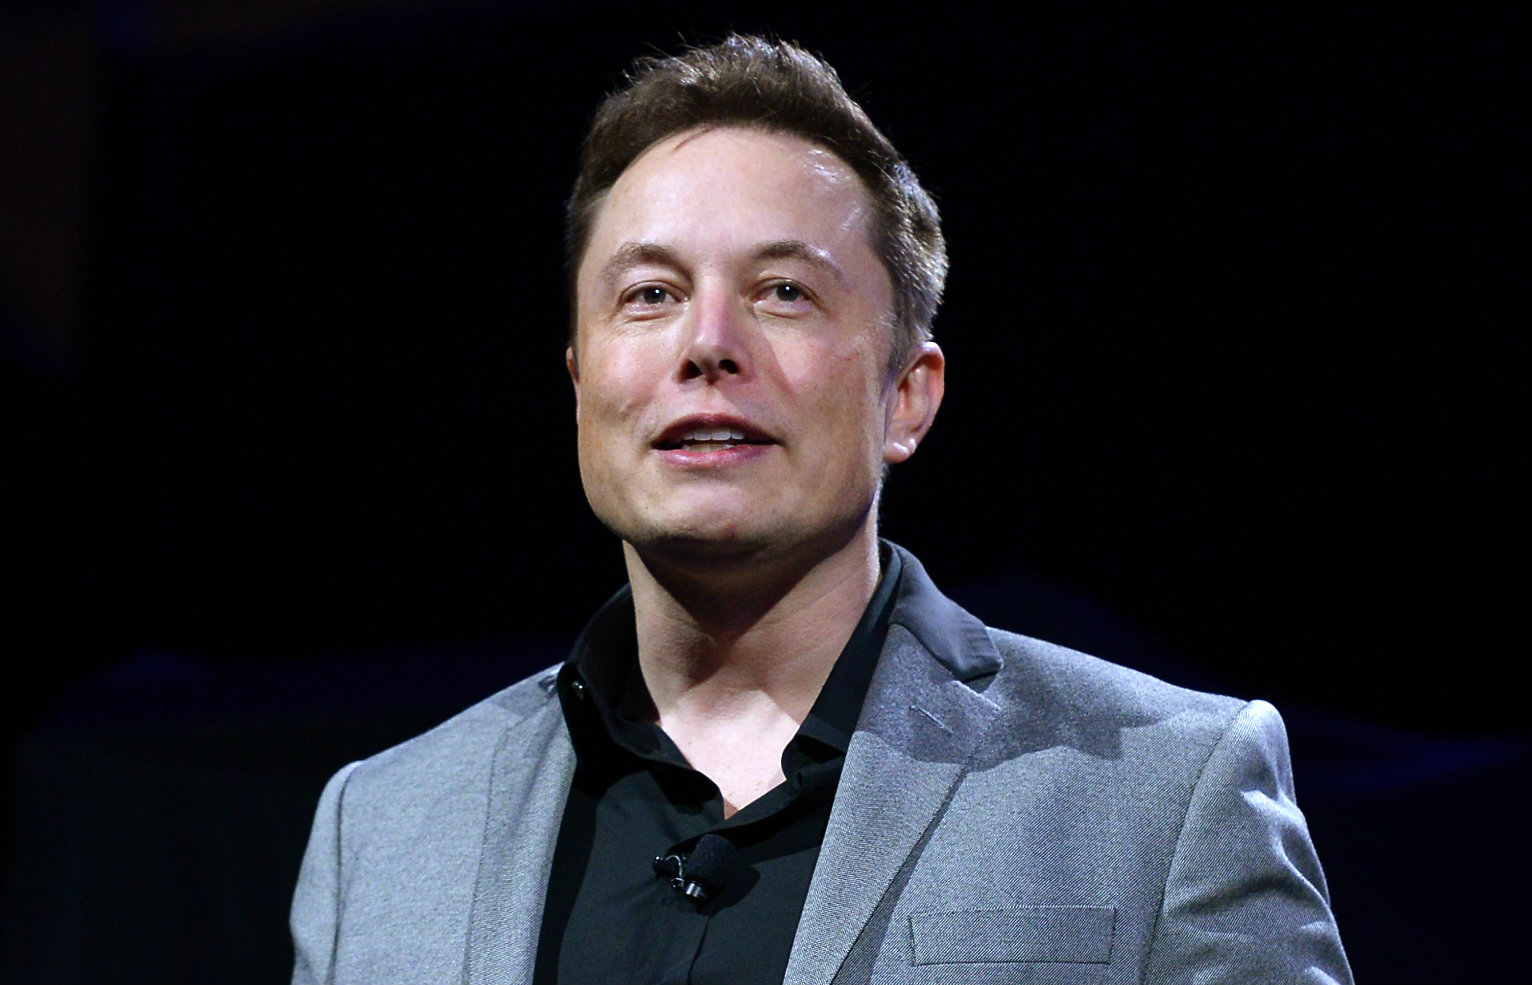 Musk reveals his AI and creates suspense “It wouldn’t be politically correct”